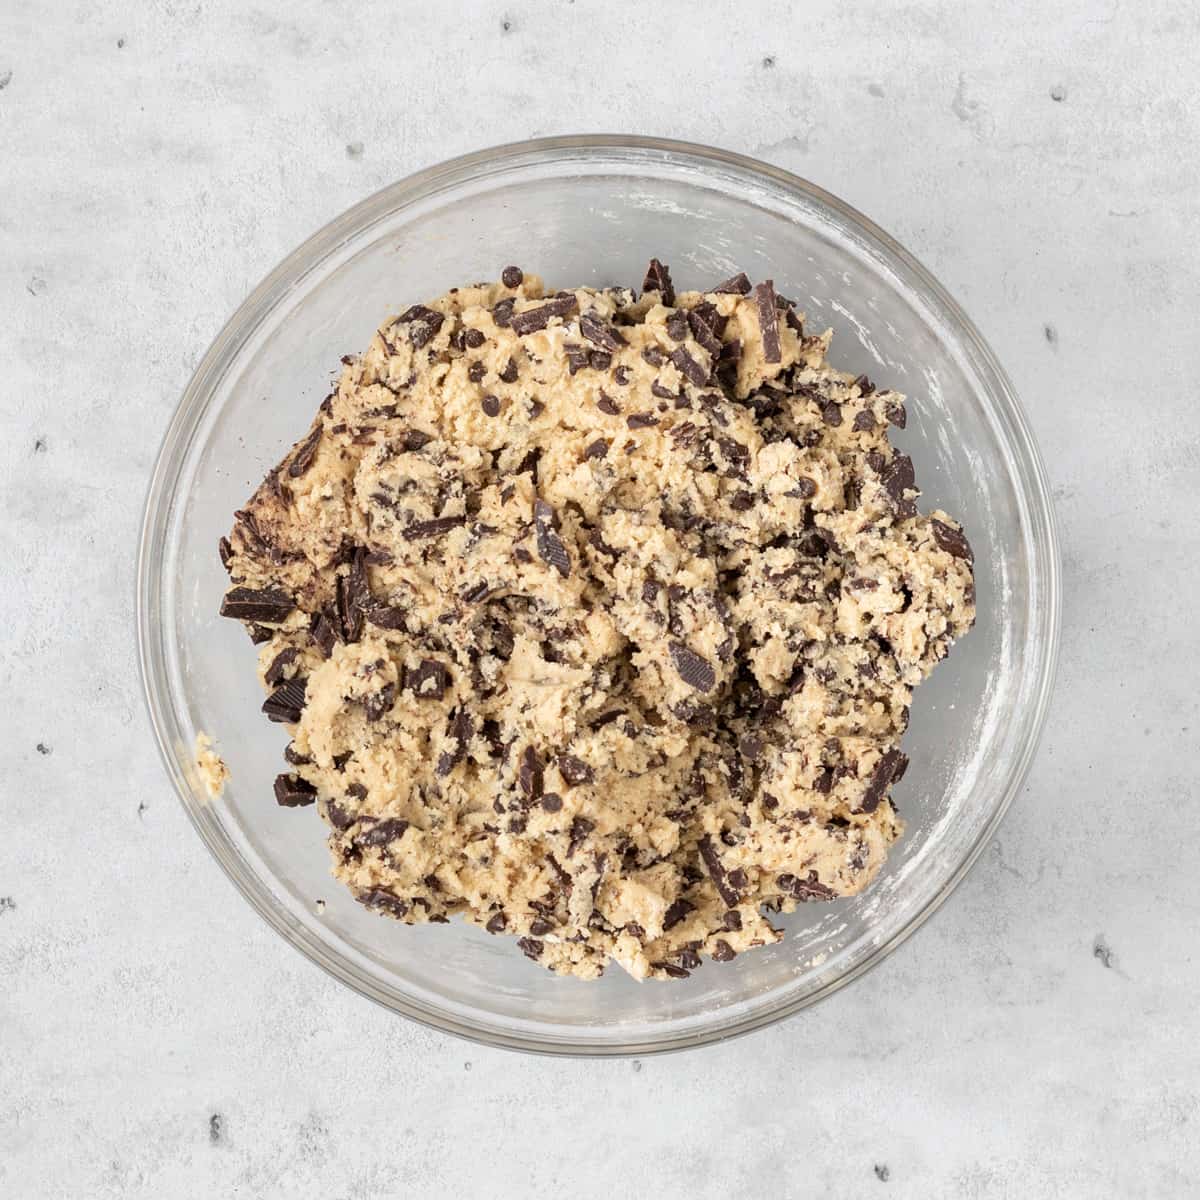 the completed chocolate chip cookie dough in a glass bowl on a grey background.